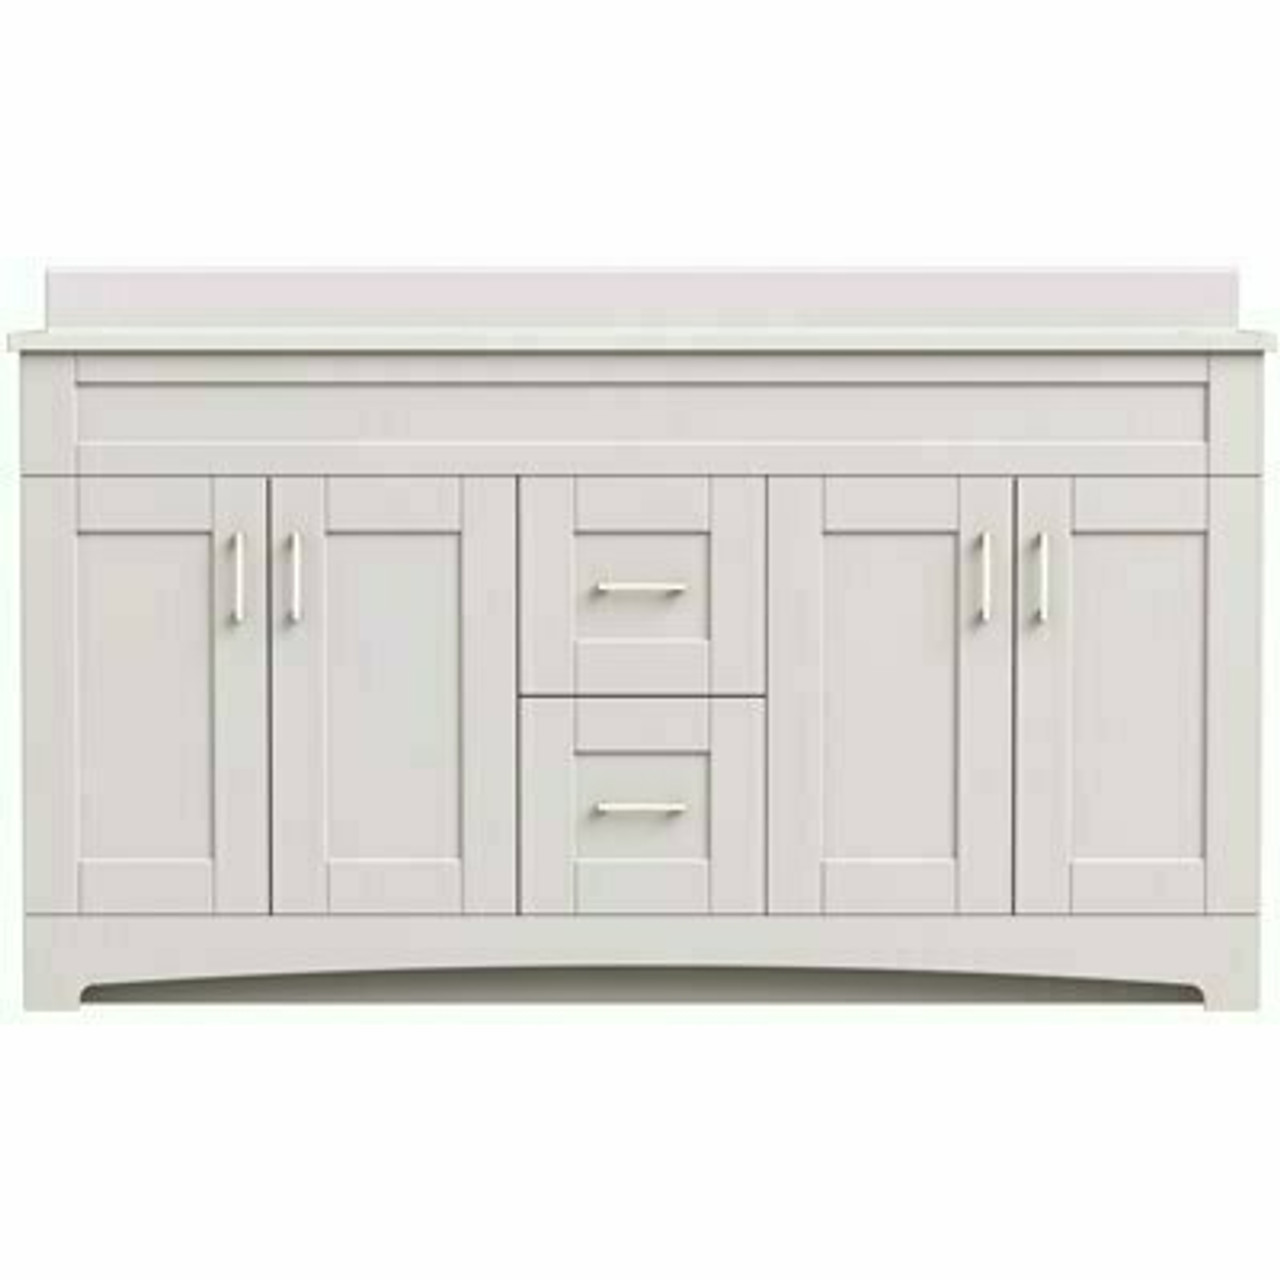 Magickwoods Brixton 60 In. W X 21 In. D Double Bowl Bath Vanity Cabinet In Vanilla White